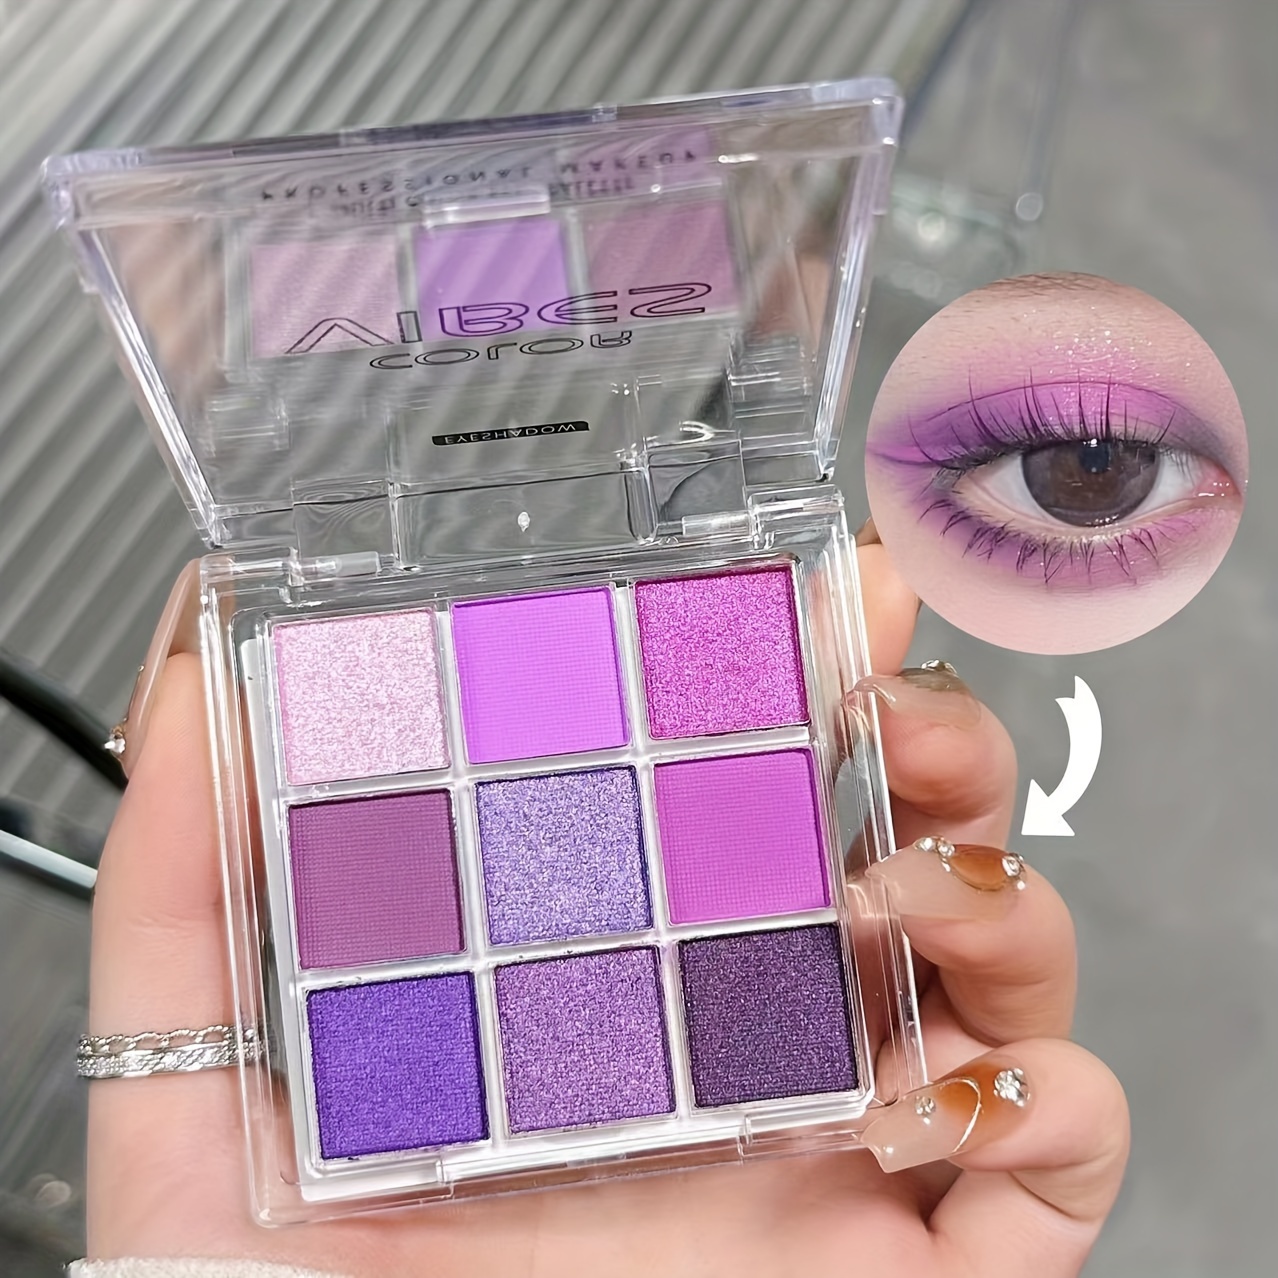 

Taro Purple 9-color Eyeshadow Palette, Matte Pearlescent Glitter, Smoked Makeup, Versatile And Durable, Purple 9-color Eye Shadow